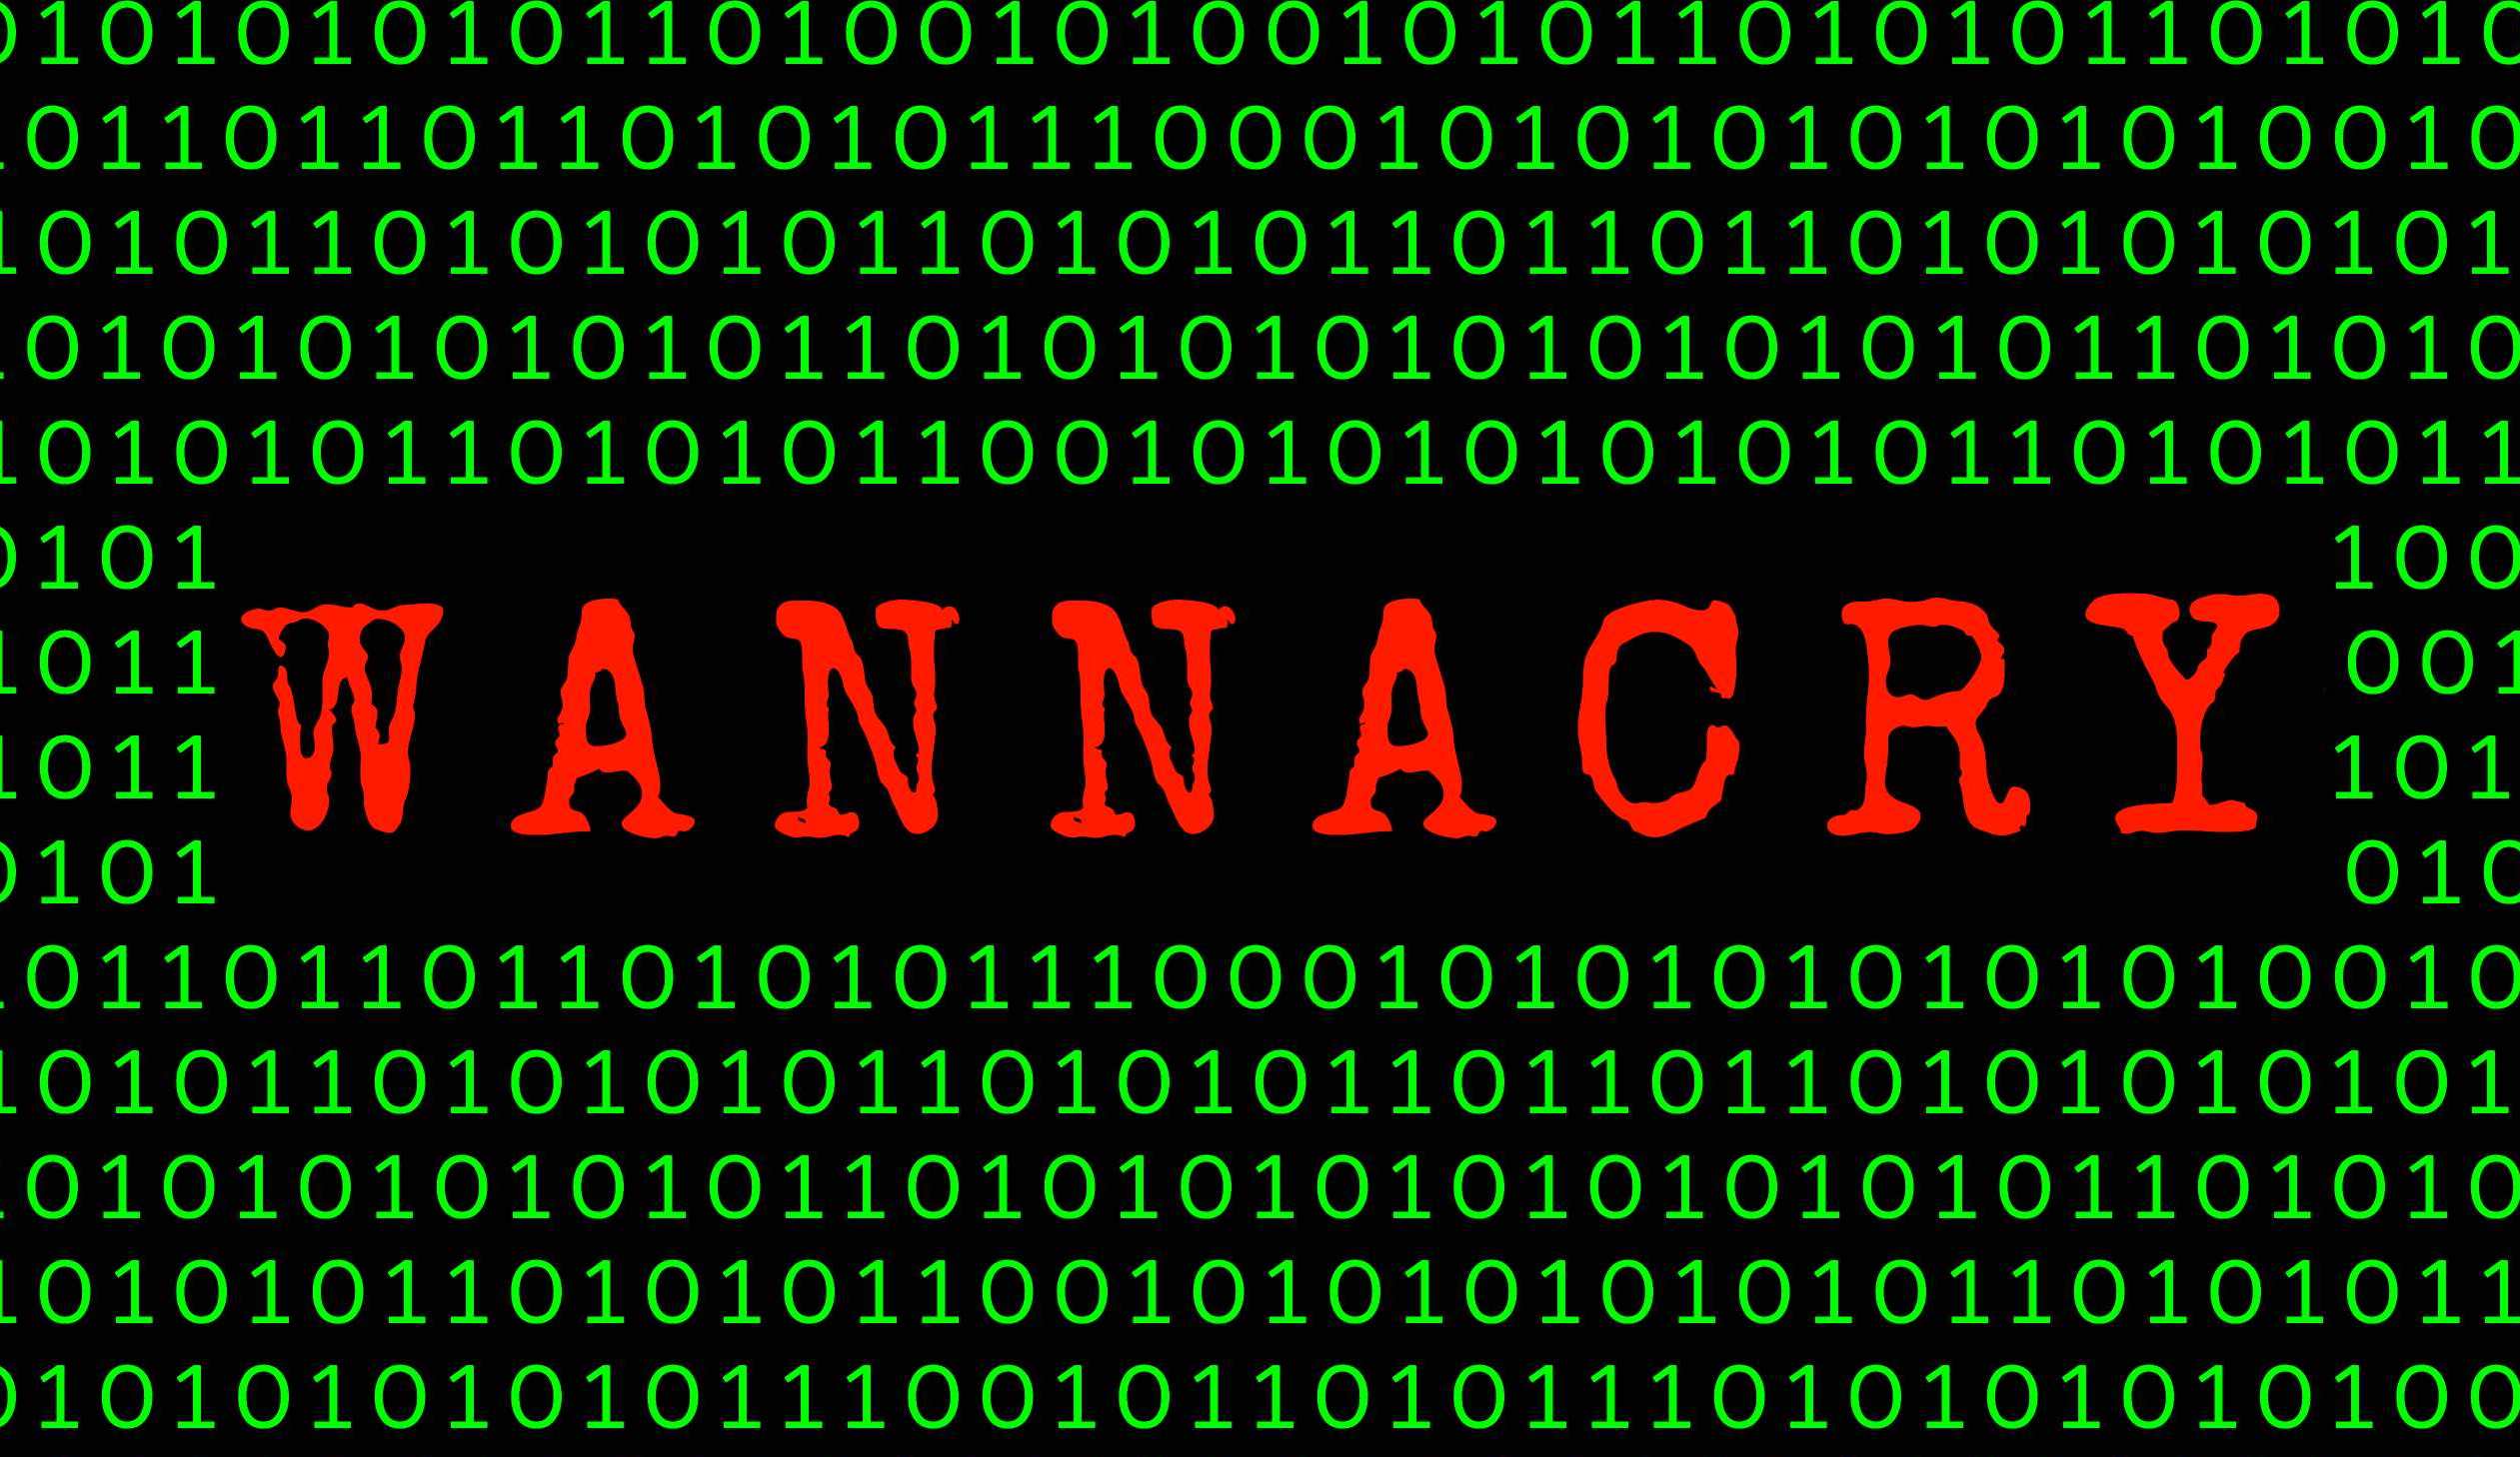 wannacry coding and tech graphic